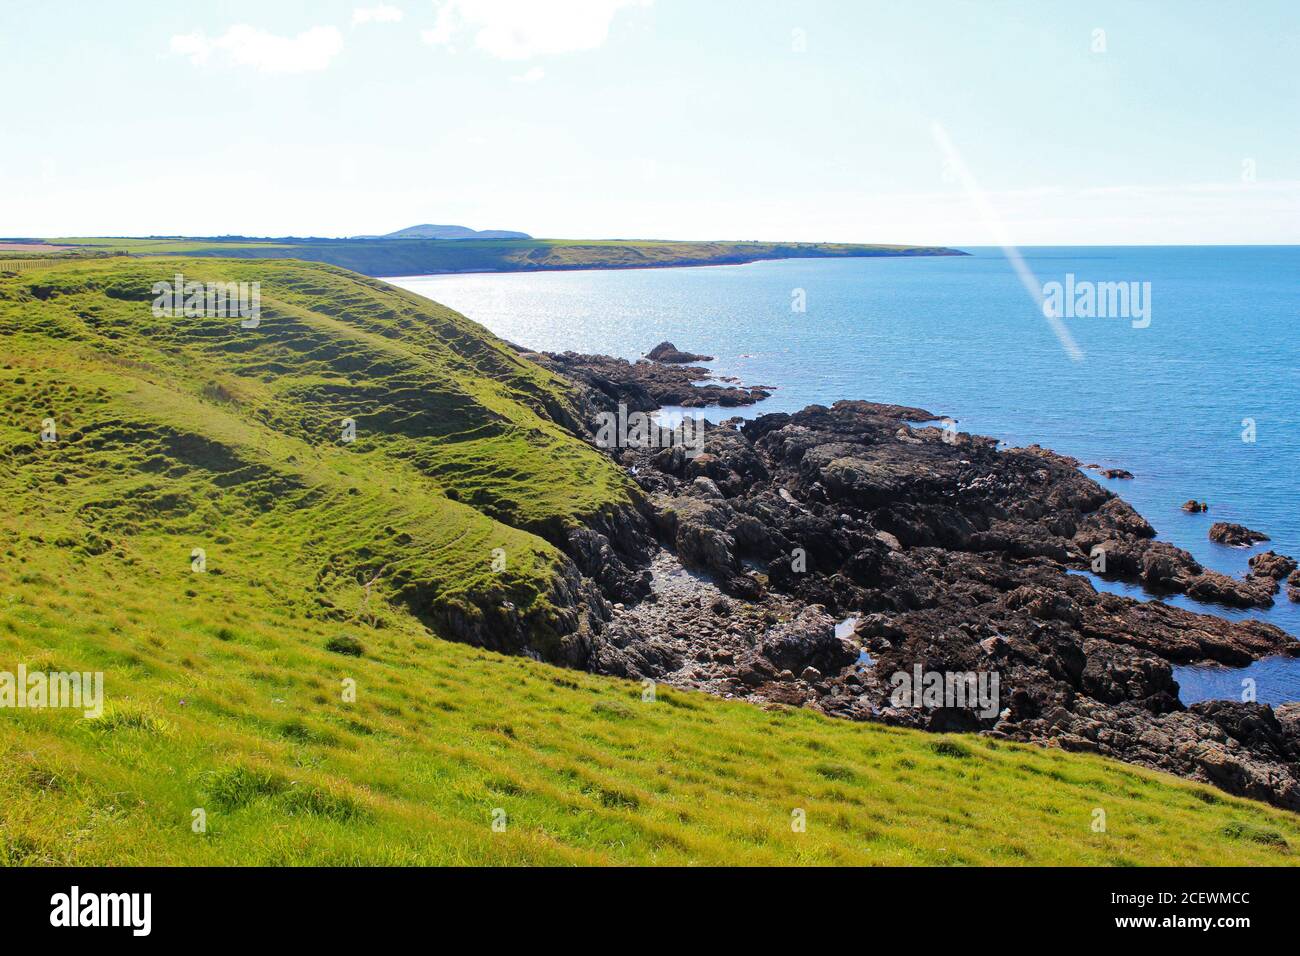 Beautiful scenery of the welsh coast, inc a green hill and rocky shore next to blue sea on a sunny day in Porth Colmen, North Wales Stock Photo